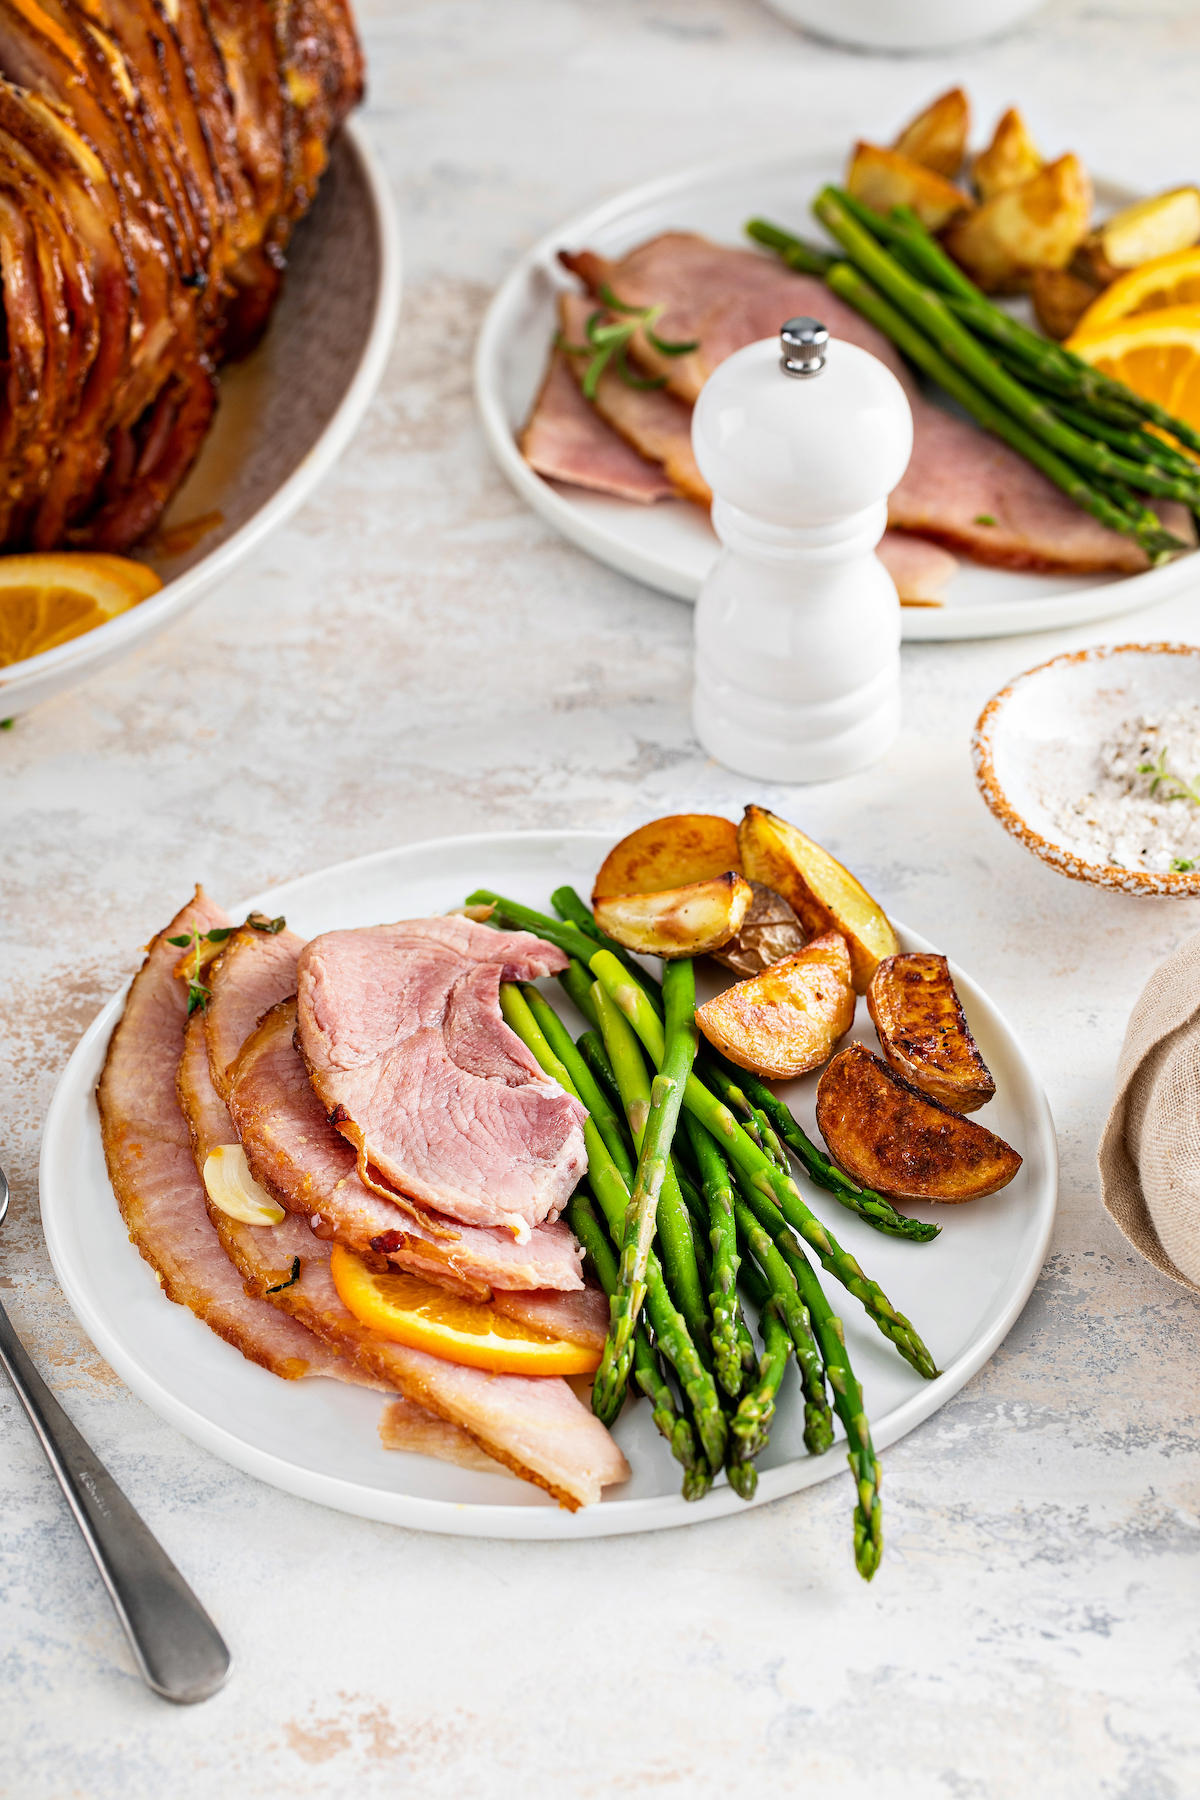 A dinner plate served with ham slices, asparagus, and potatoes.